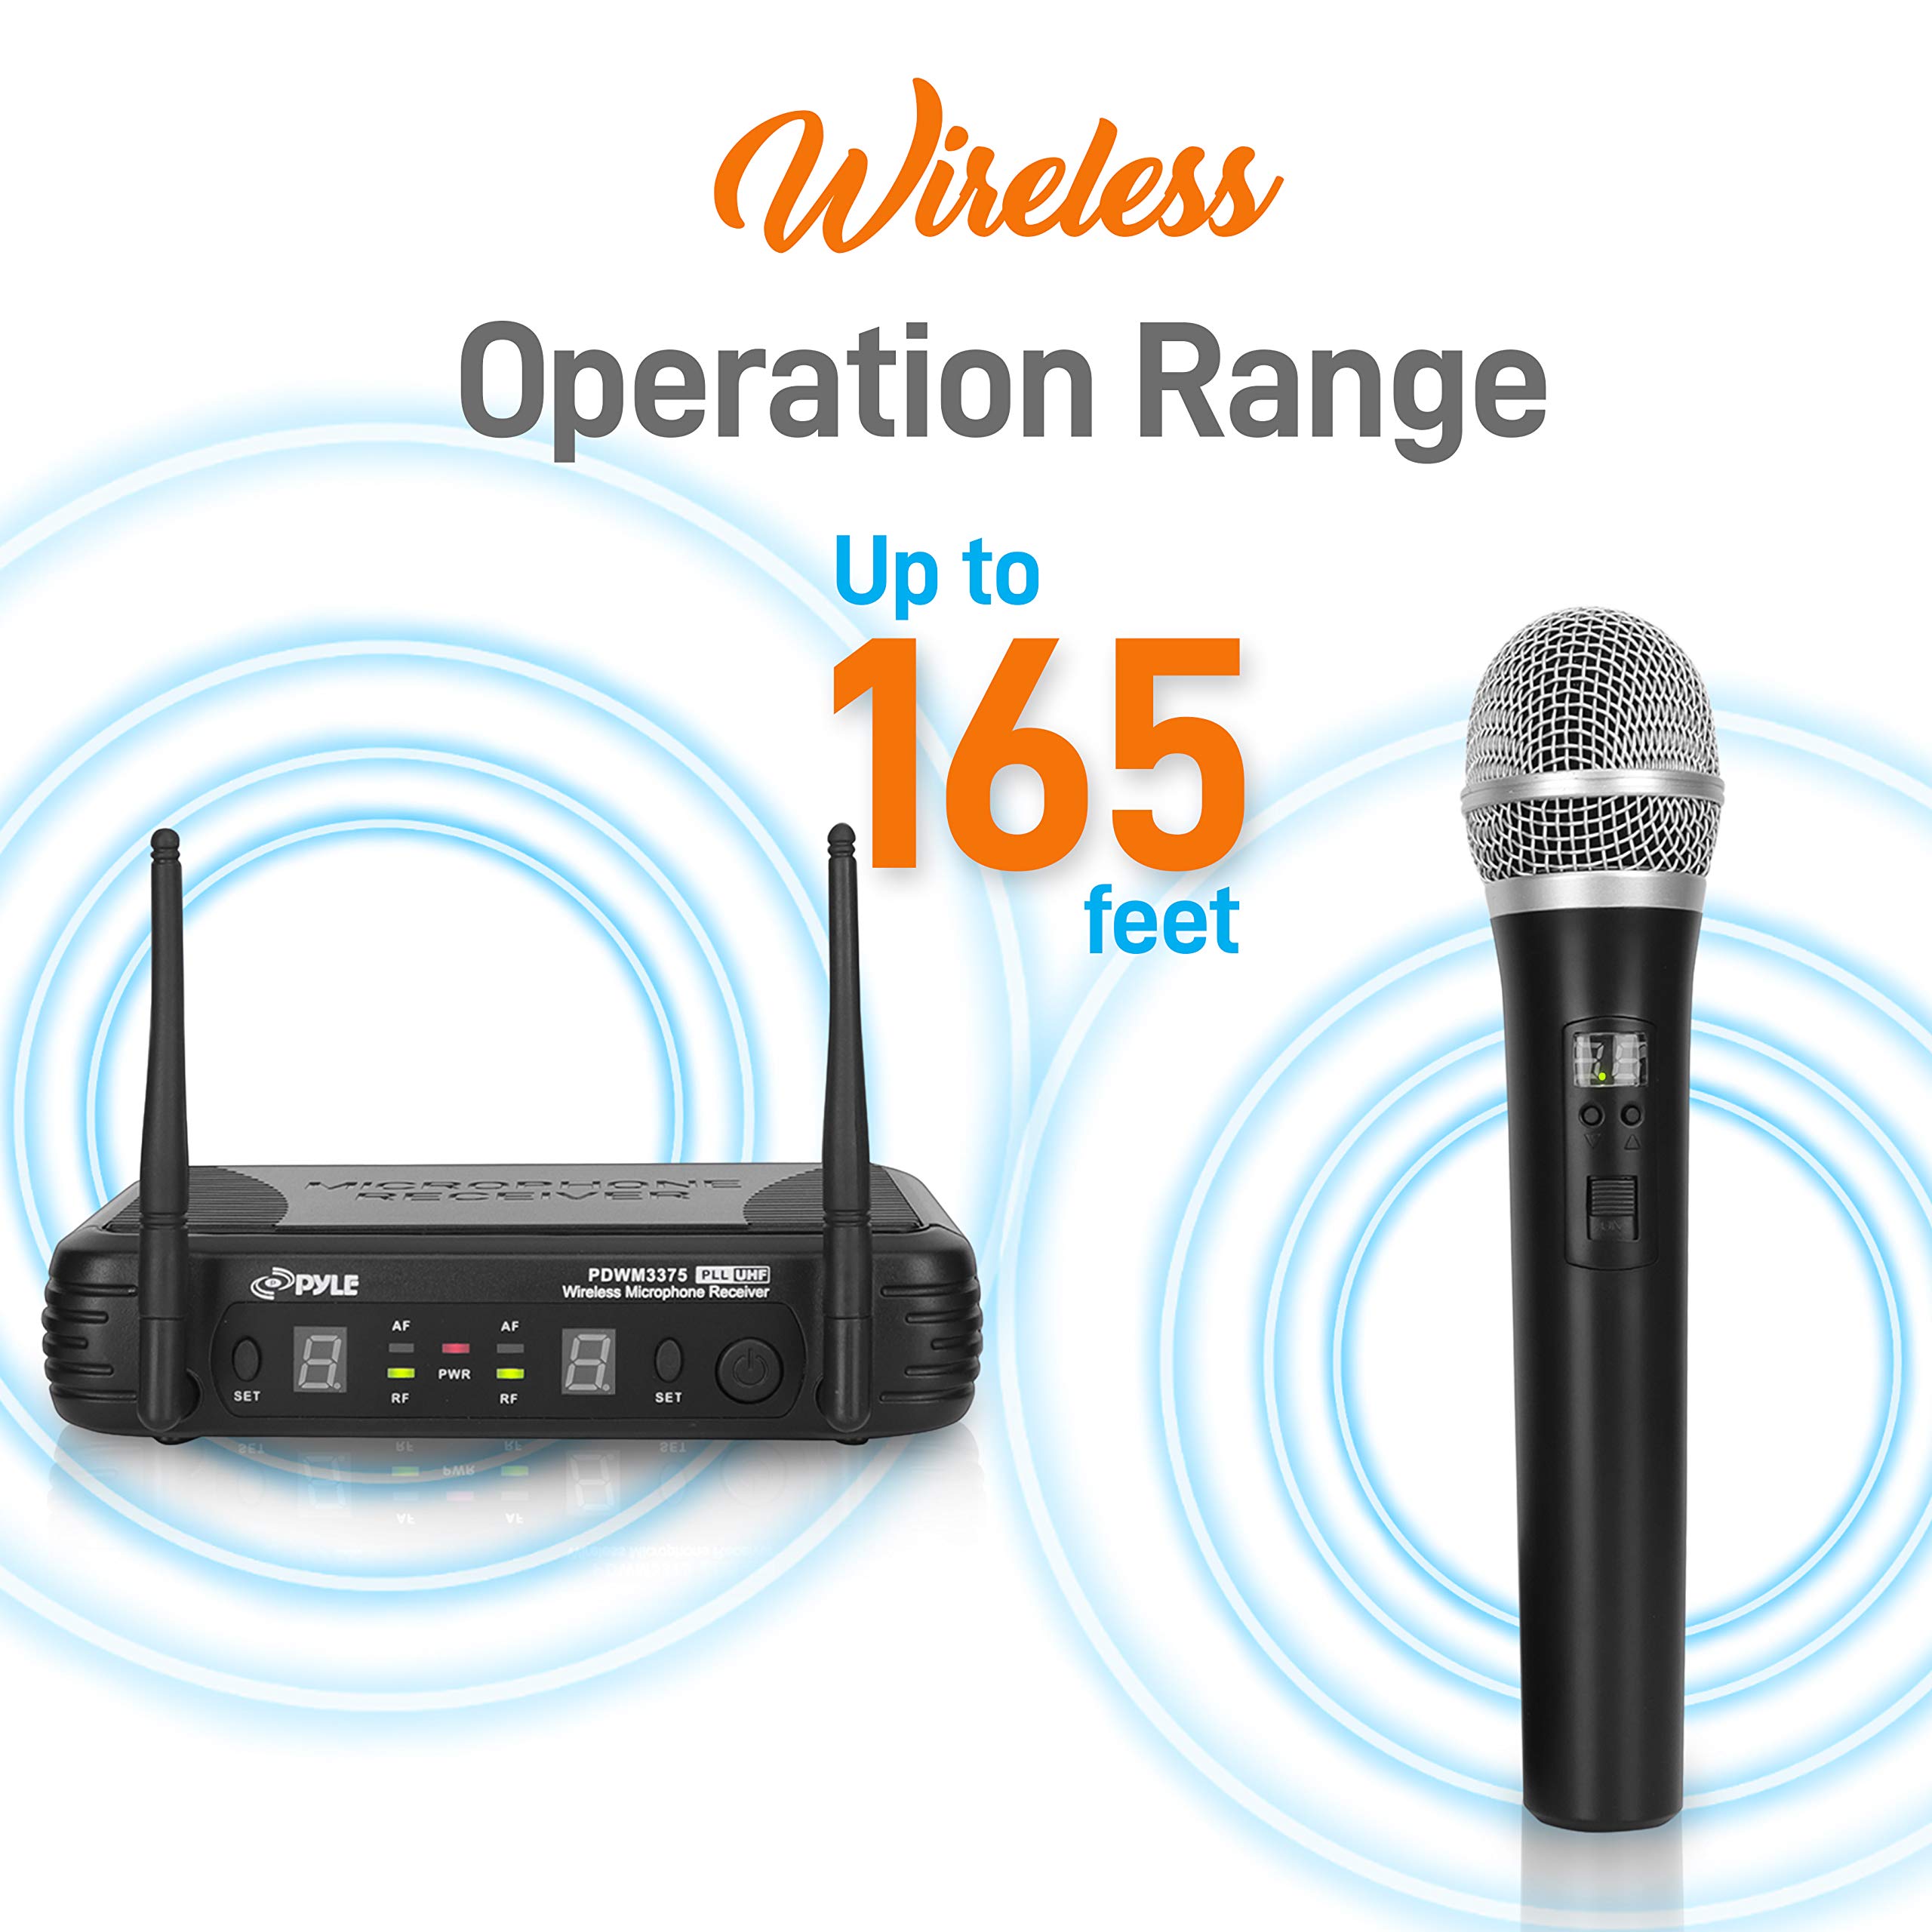 PYLE-PRO Professional Wireless Microphone System - Dual UHF Band, Wireless, Handheld, 2 MICS With 8 Selectable Frequency Channels, Independent Volume Controls, AF & RF Signal Indicators - PDWM3375